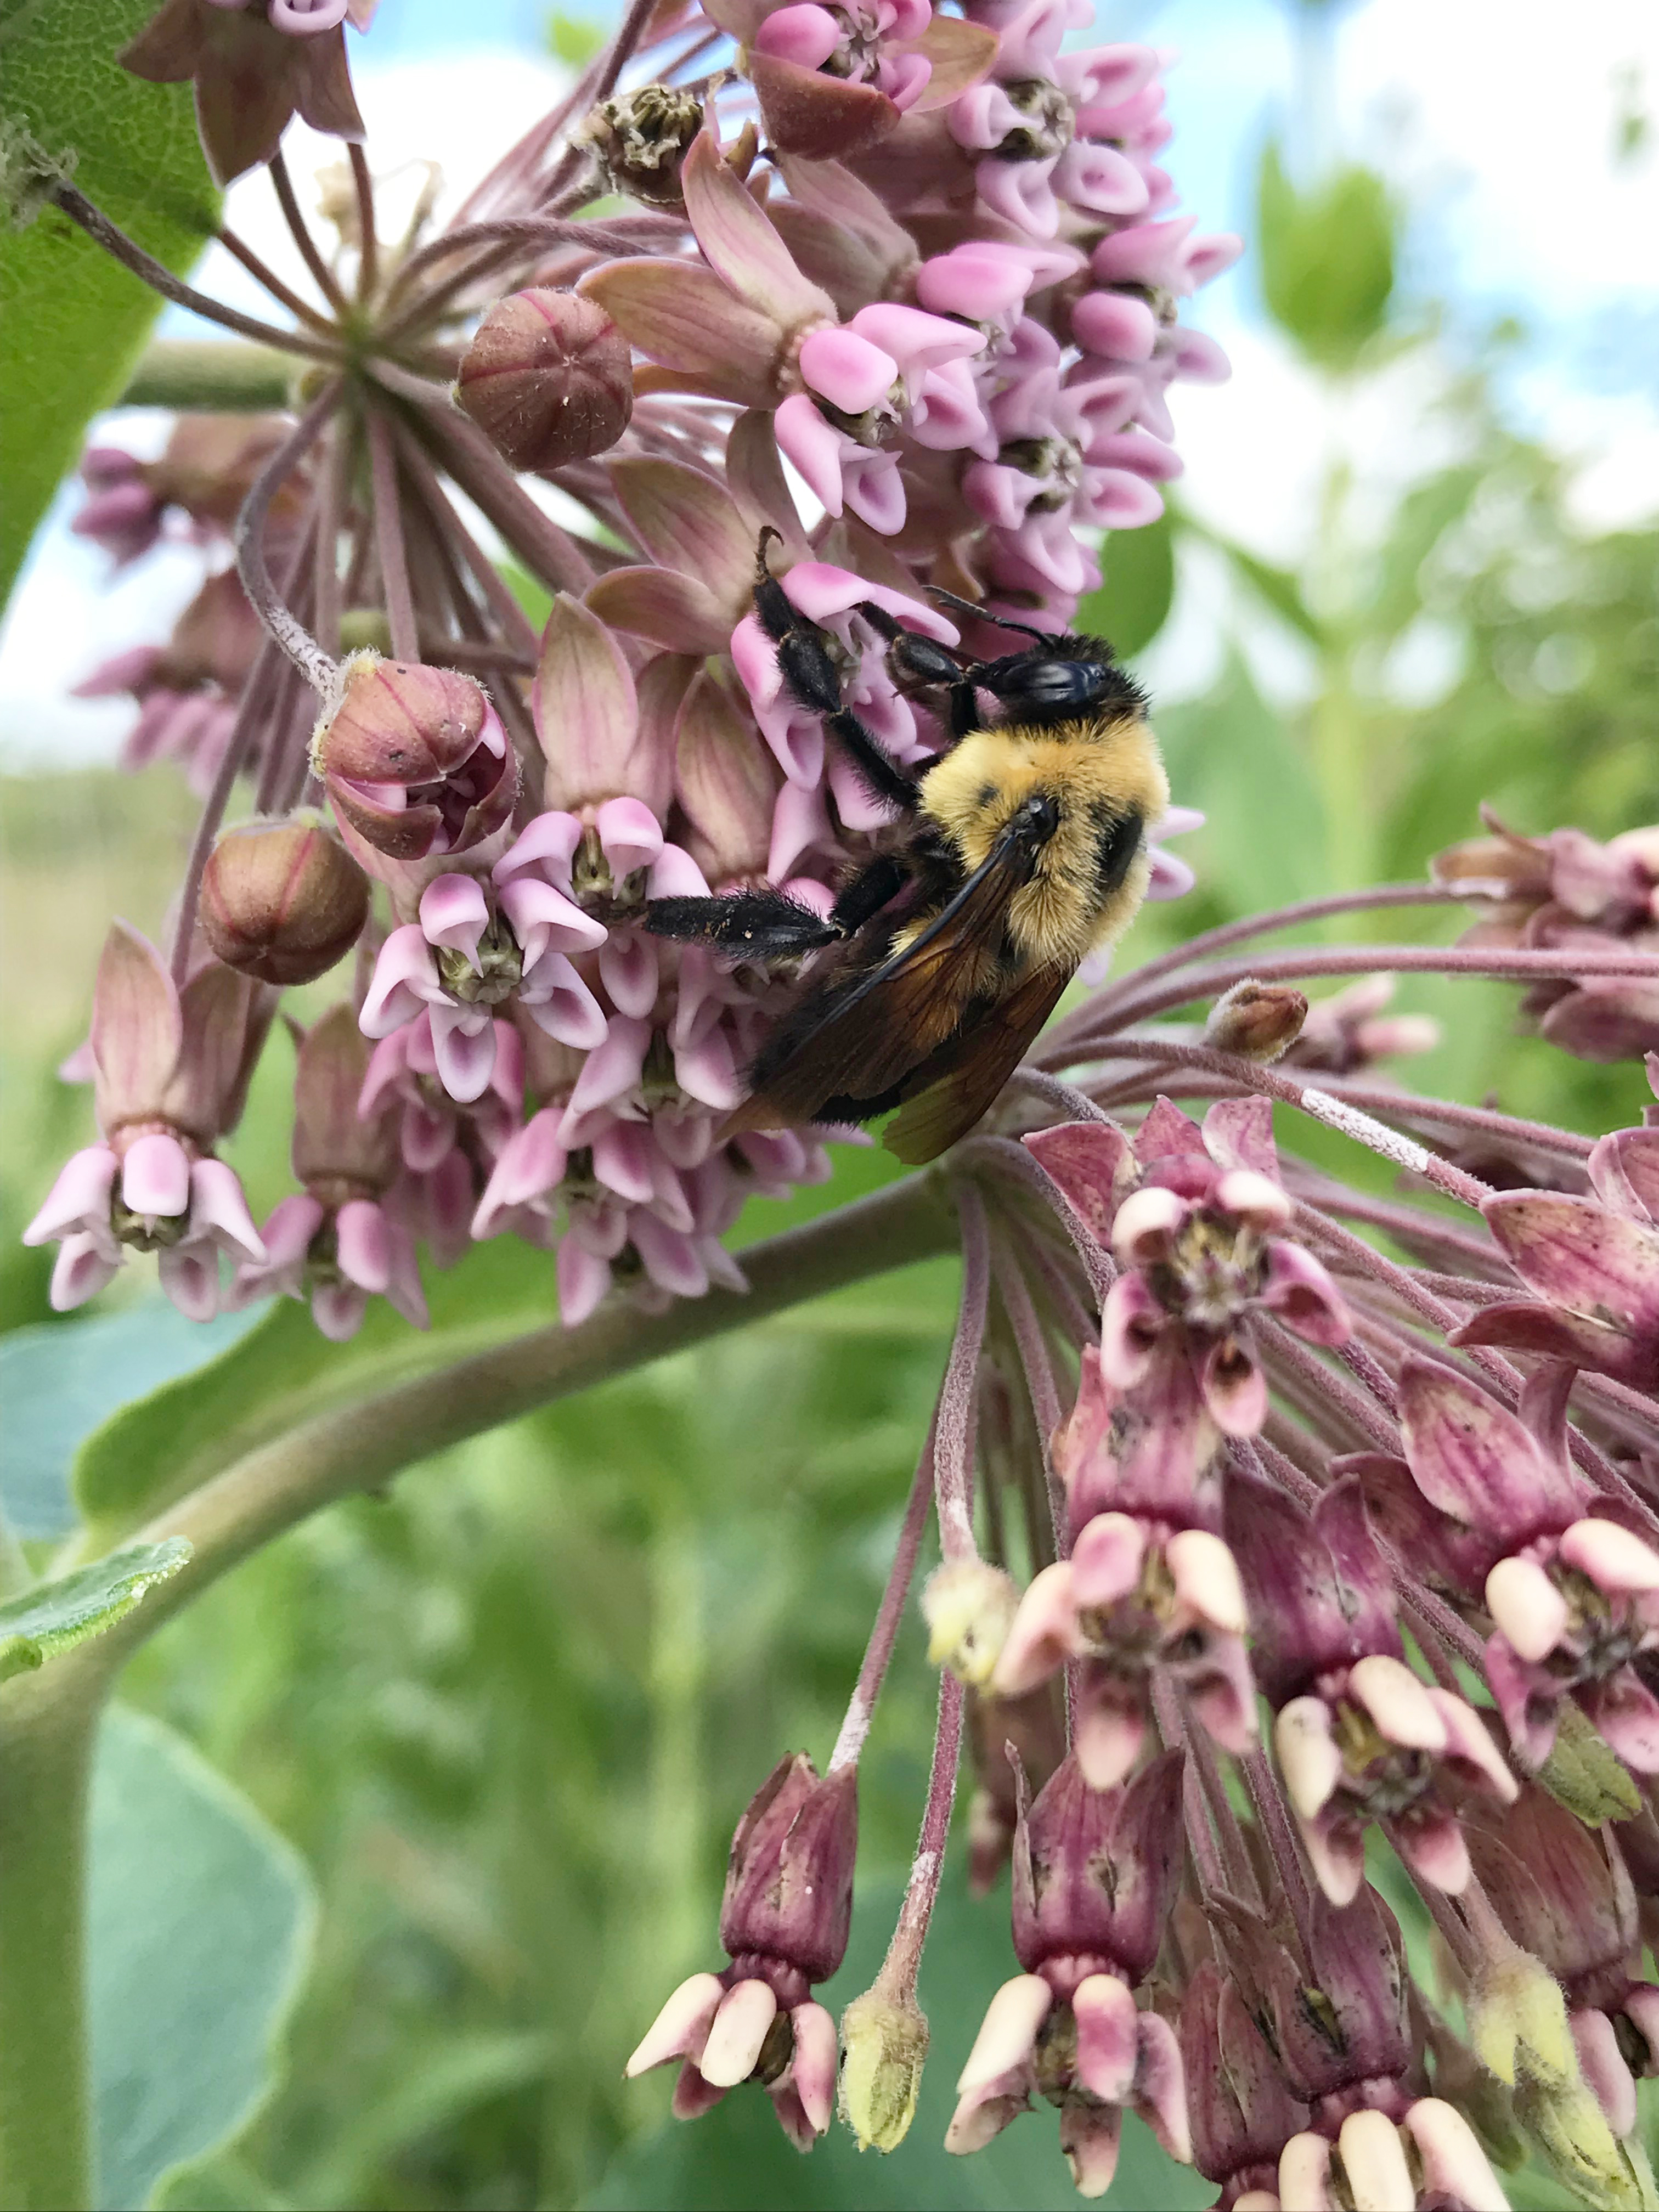 A bumble bee clings to purplish-pink milkweed blossoms in this close-up photo.